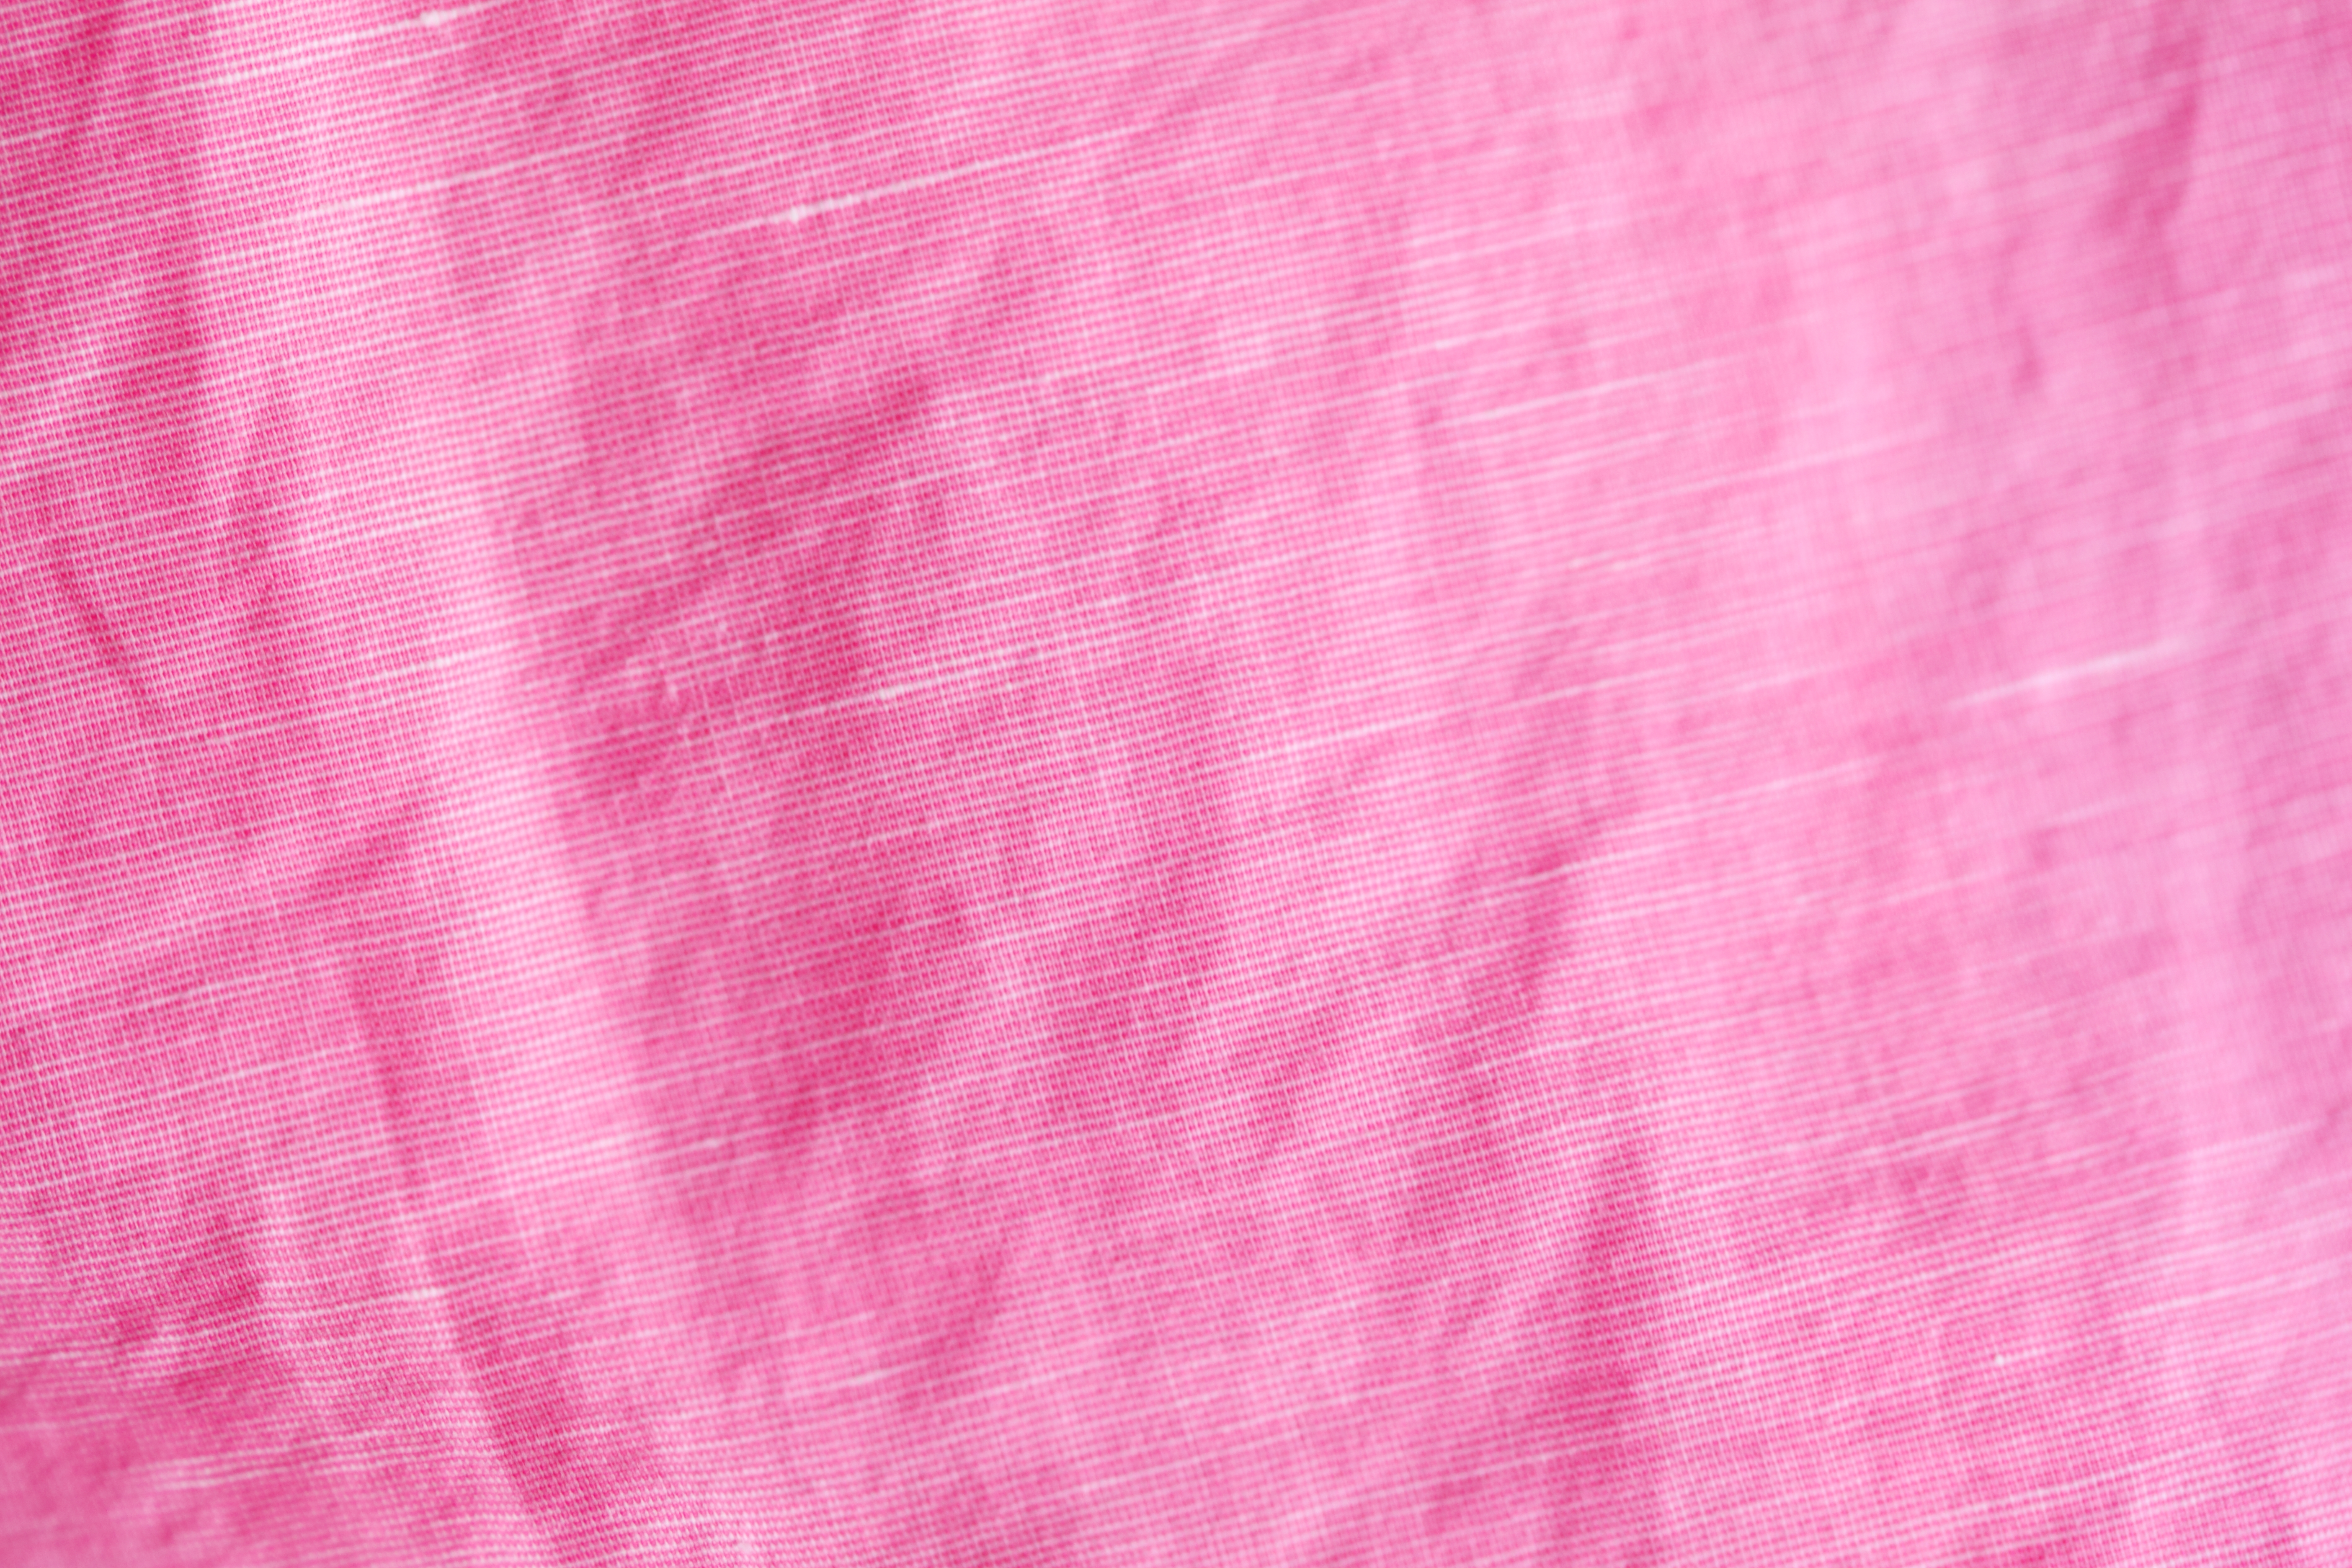 File:Pink Woven Cotton Silk Fabric Texture Free Creative Commons ...